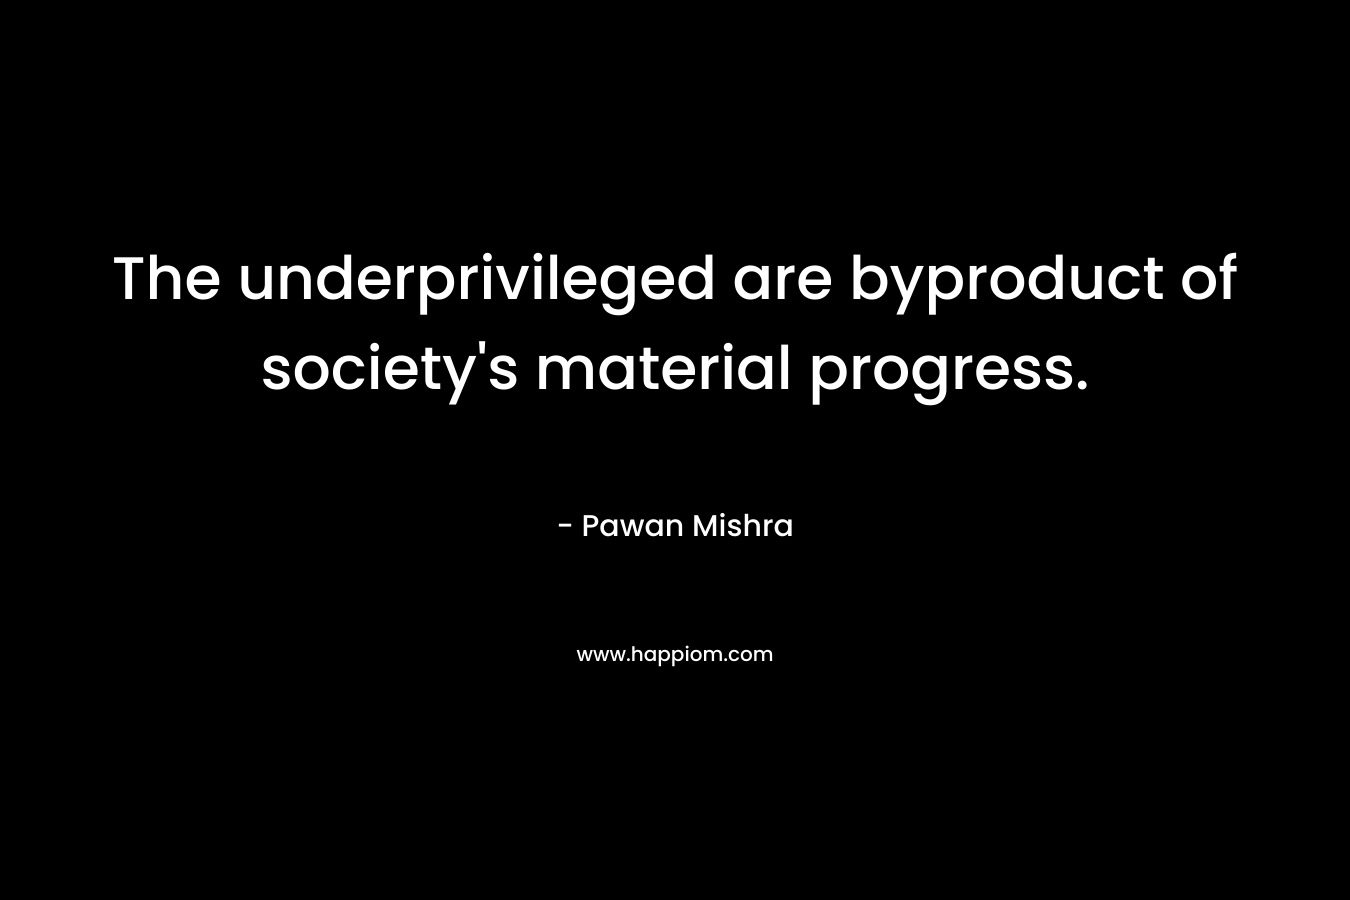 The underprivileged are byproduct of society's material progress.